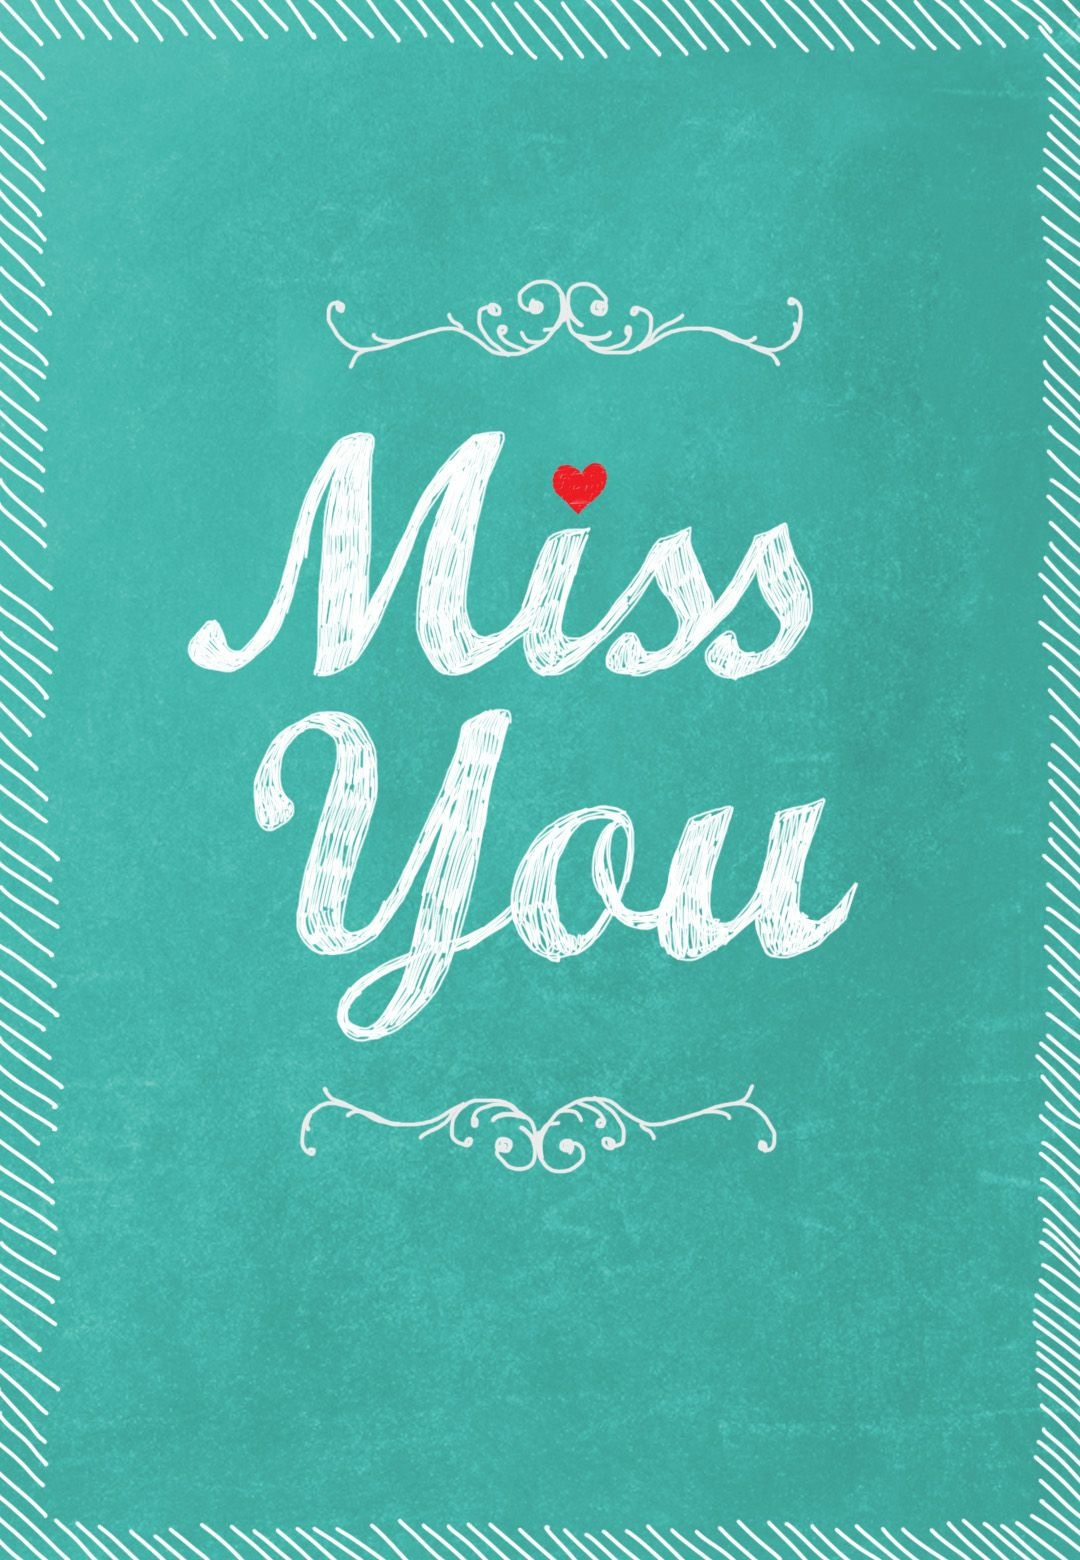 We Will Miss You Cards For Coworker Printable Free Free Printable